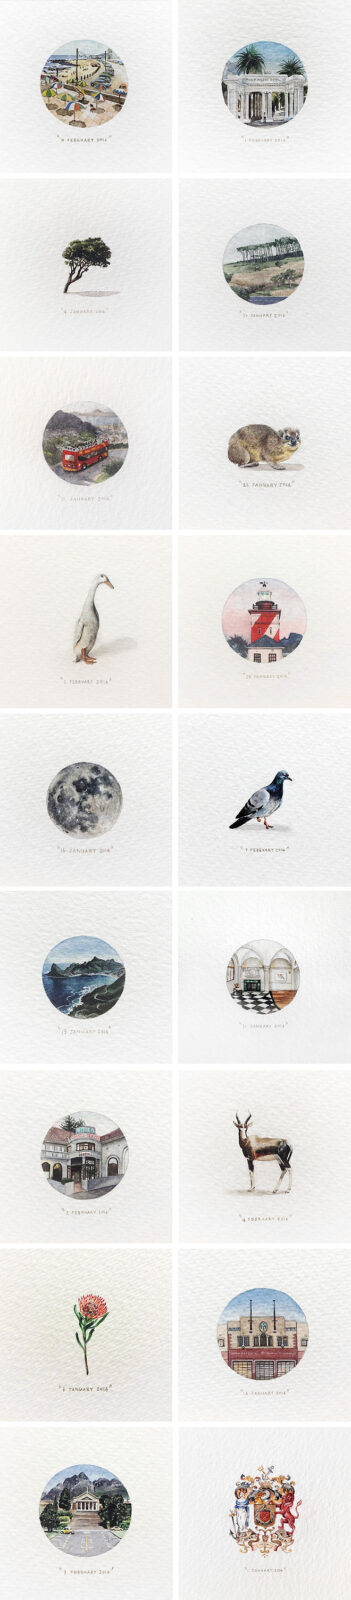 Lorraine Loots // Paintings for Ants